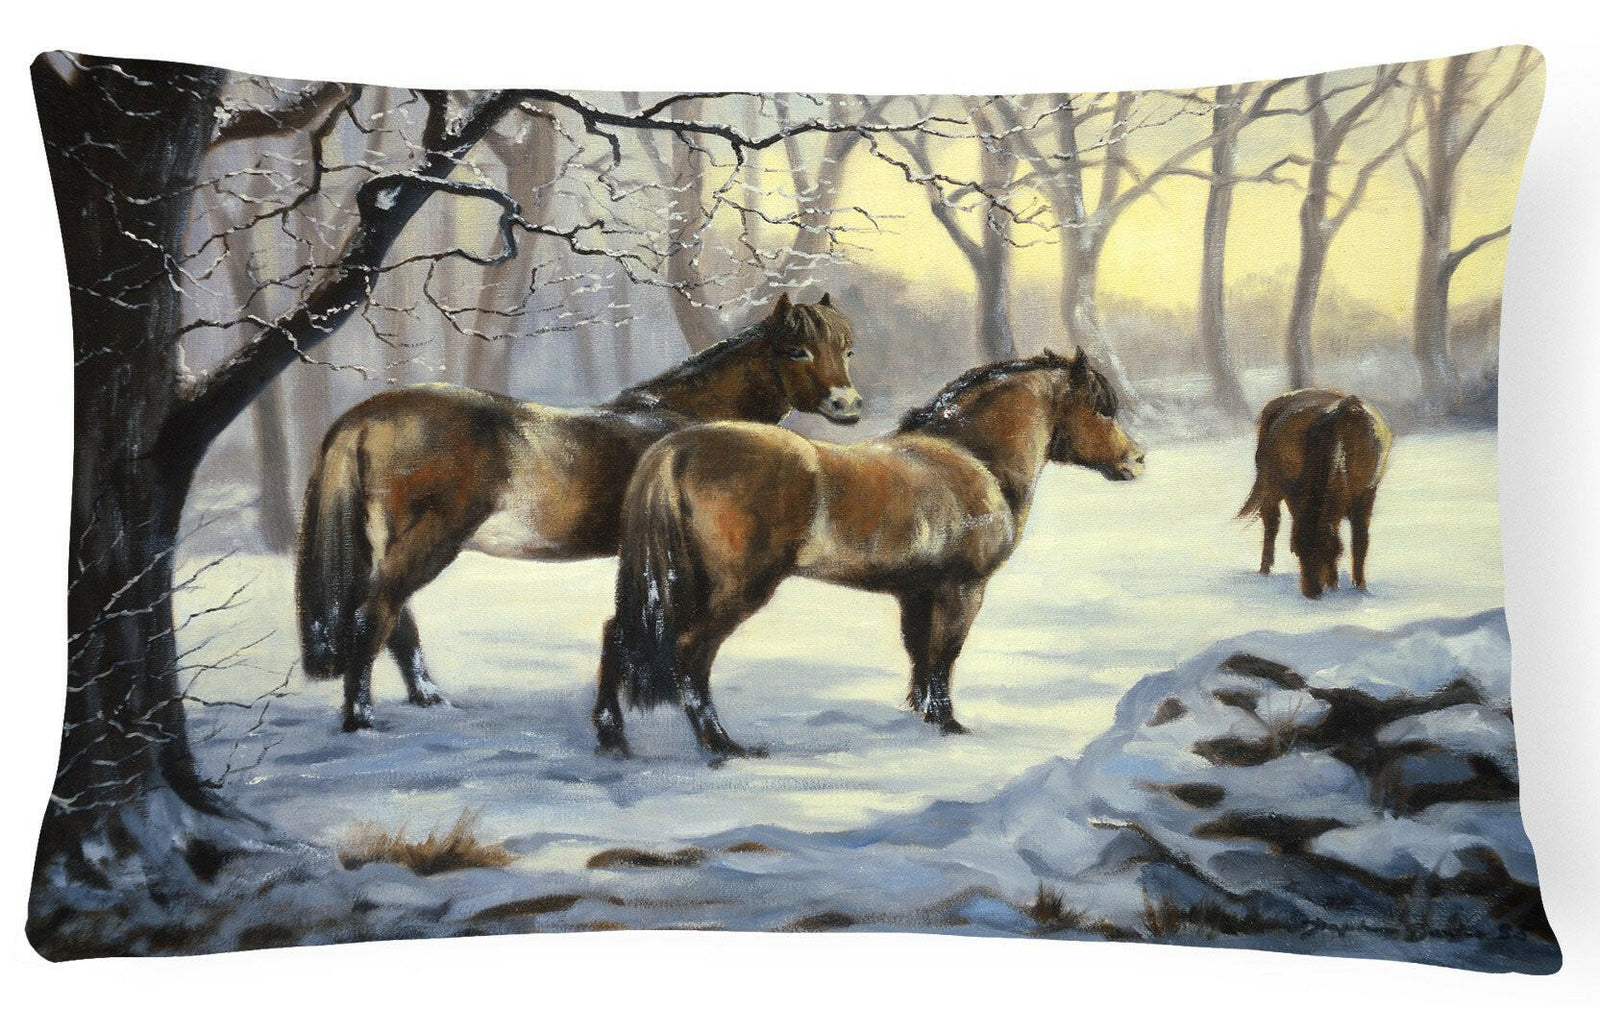 Horses in Snow by Daphne Baxter Fabric Decorative Pillow BDBA0122PW1216 by Caroline's Treasures